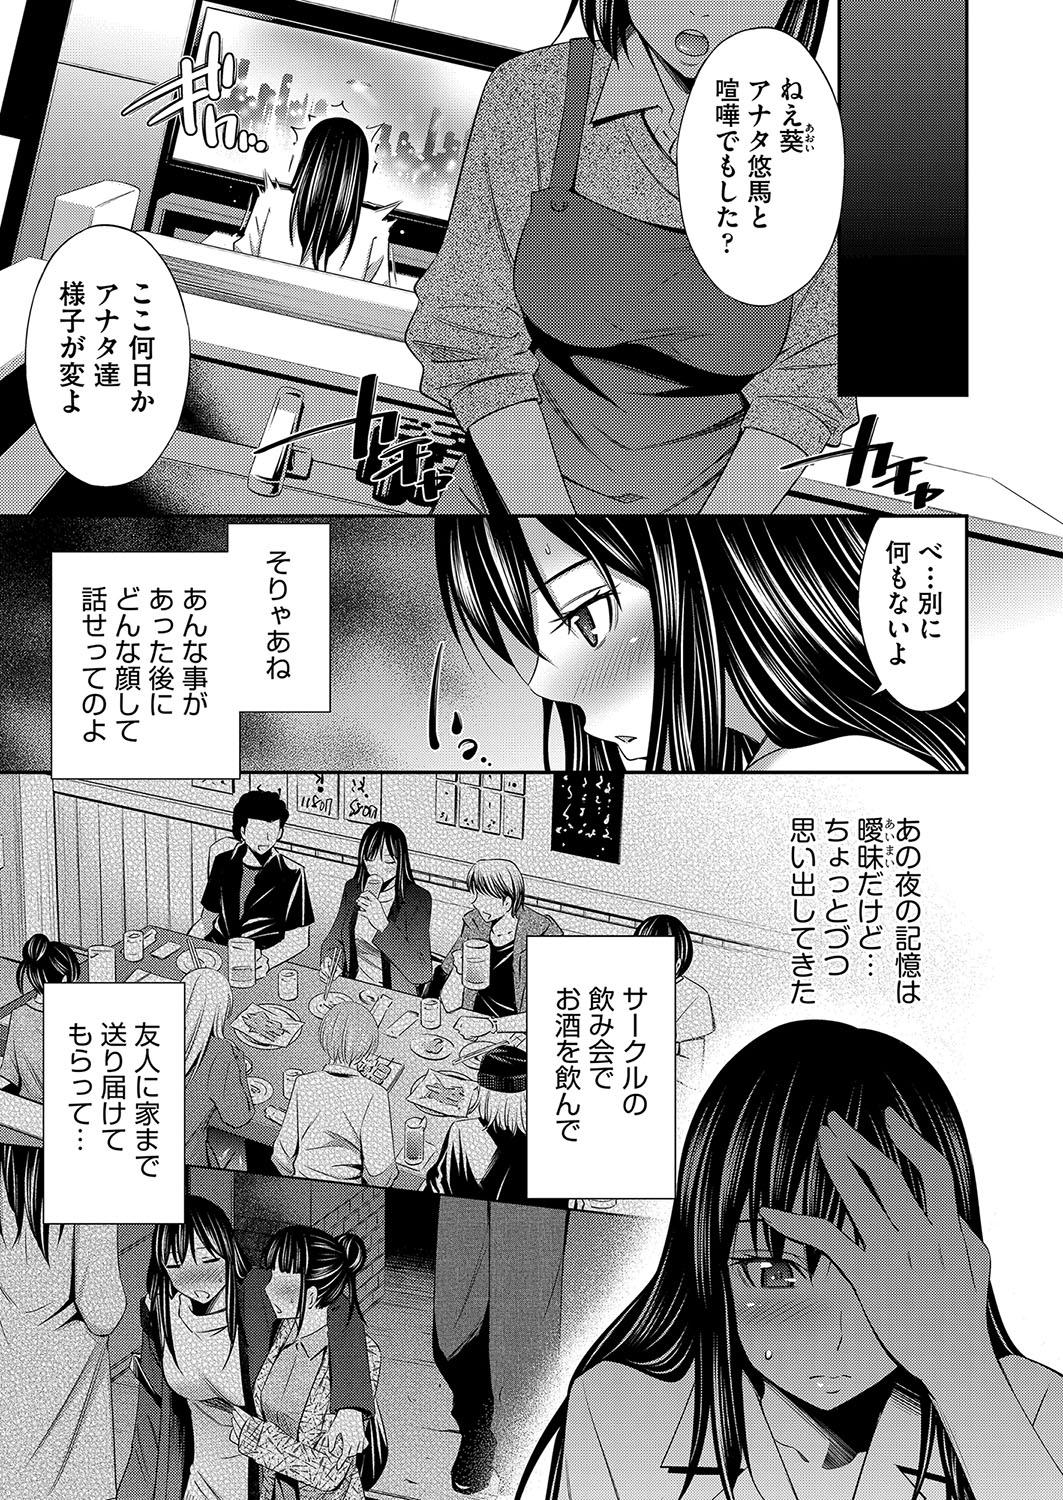 Celebrities 姉ちゃんとｘｘ Camgirl - Page 10